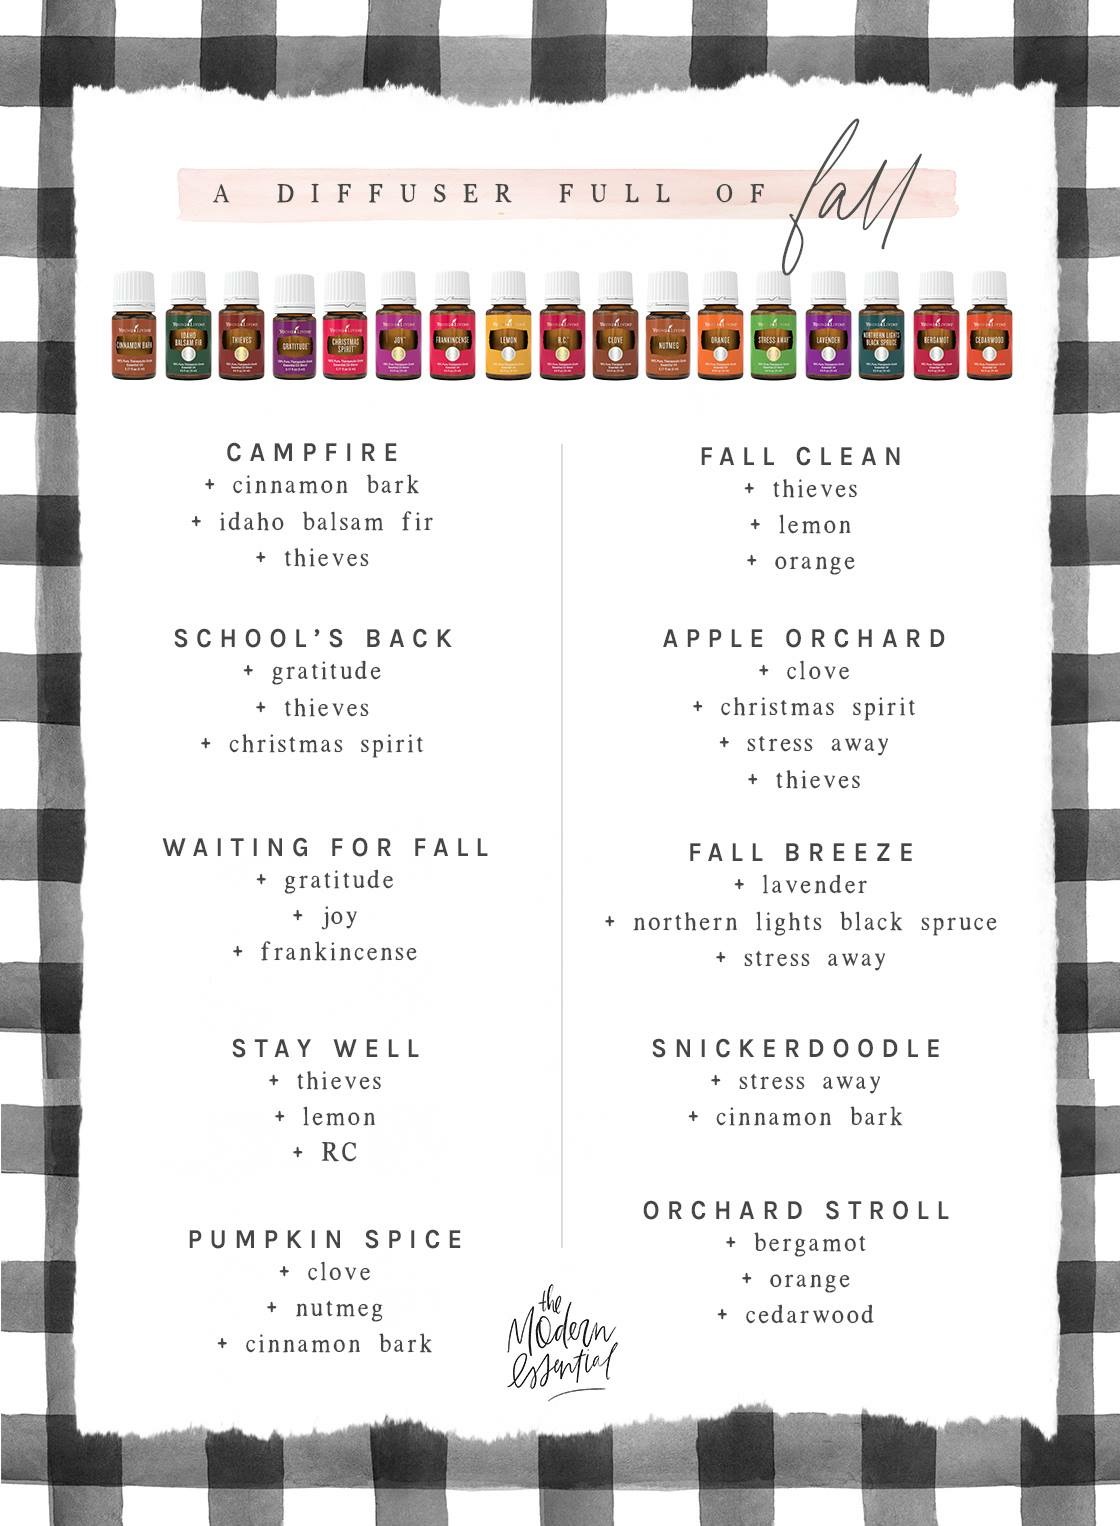 The best fall diffuser blends to use this year! #fall #diffuserblends #essentialoils